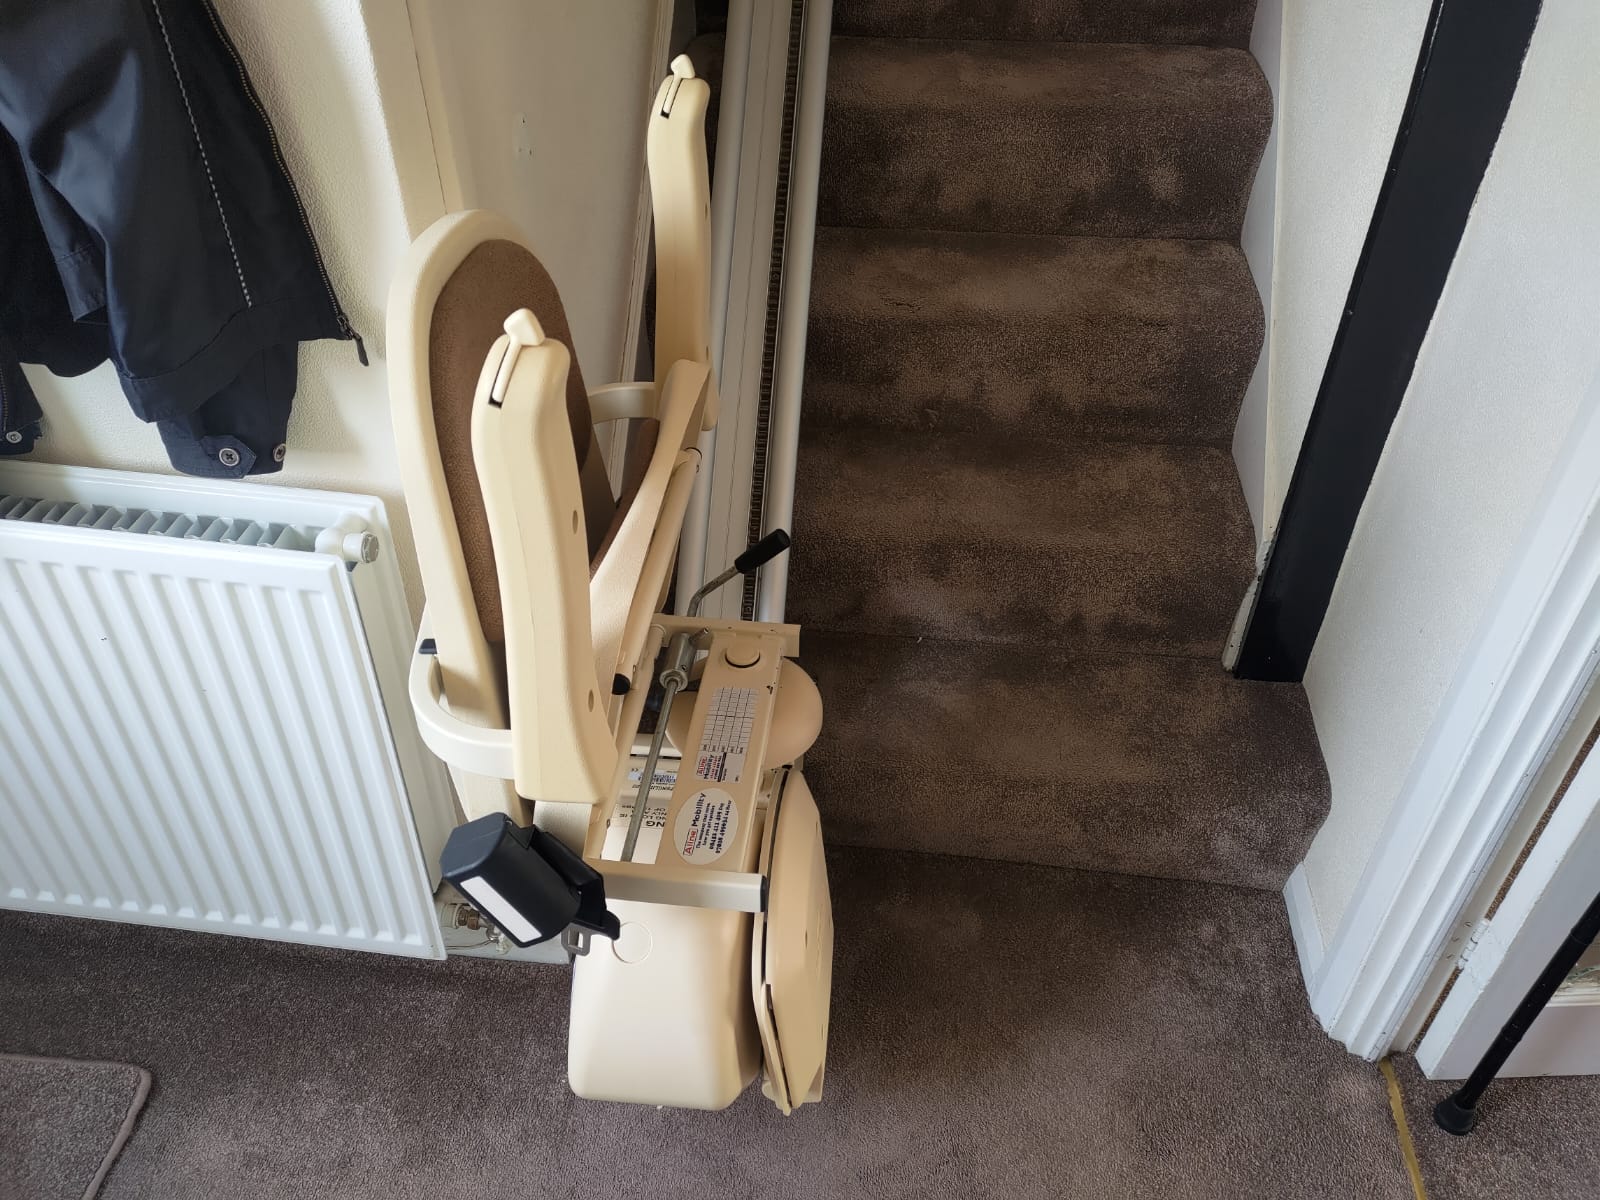 New Brooks Straight Stairlift Install Widnes Cheshire